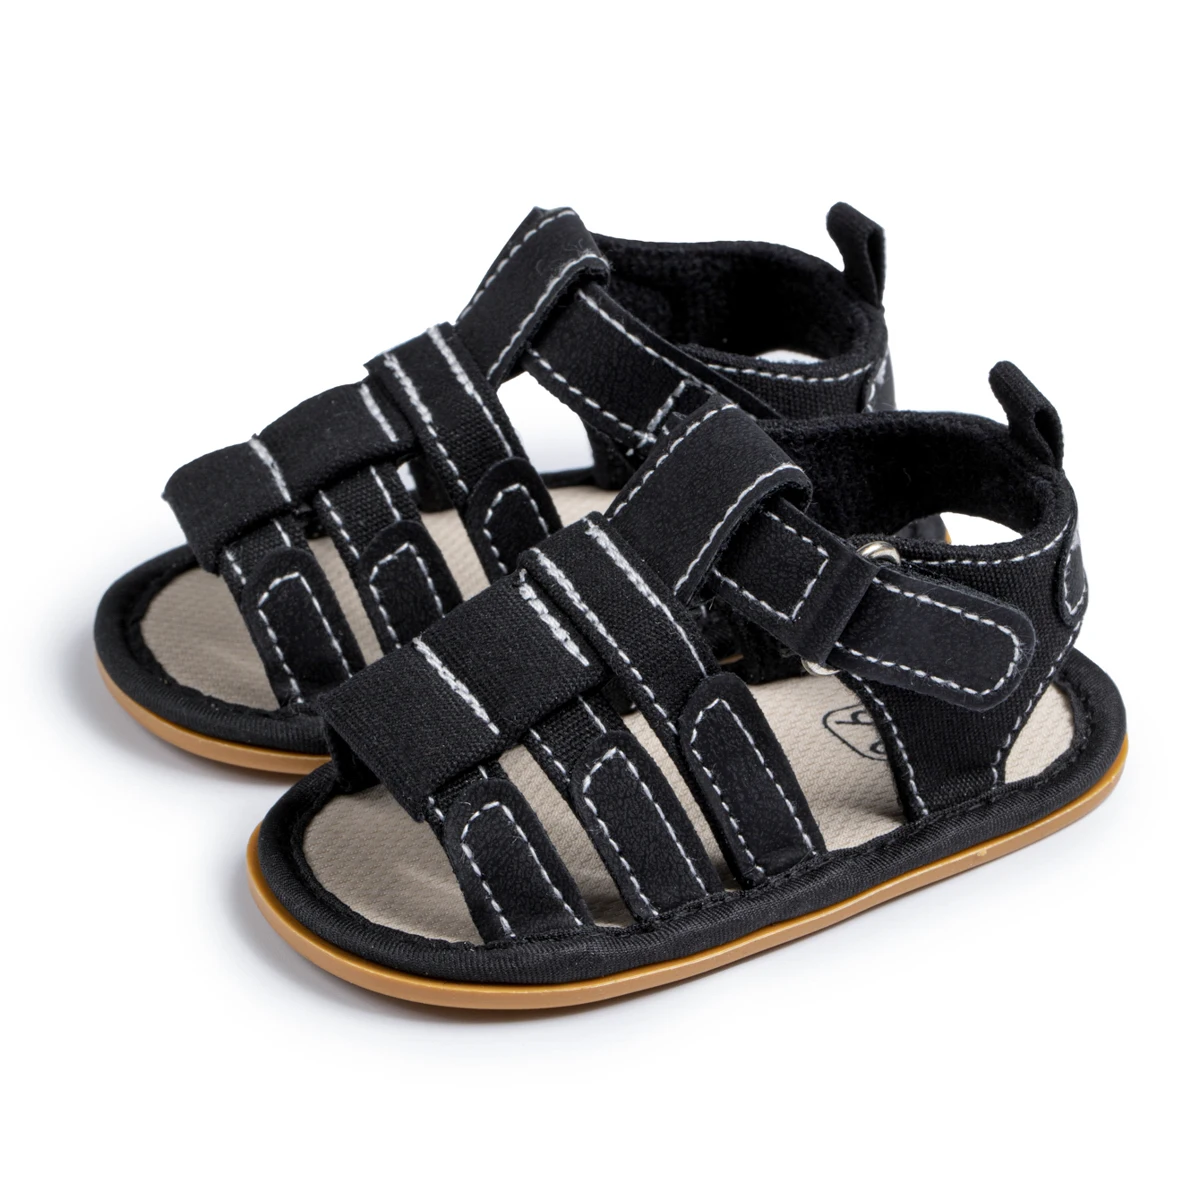 In-Stock Wholesale Infant Outdoor Summer Breathable Rubber Soft Sole Canvas Fabric Baby Boy Sandals